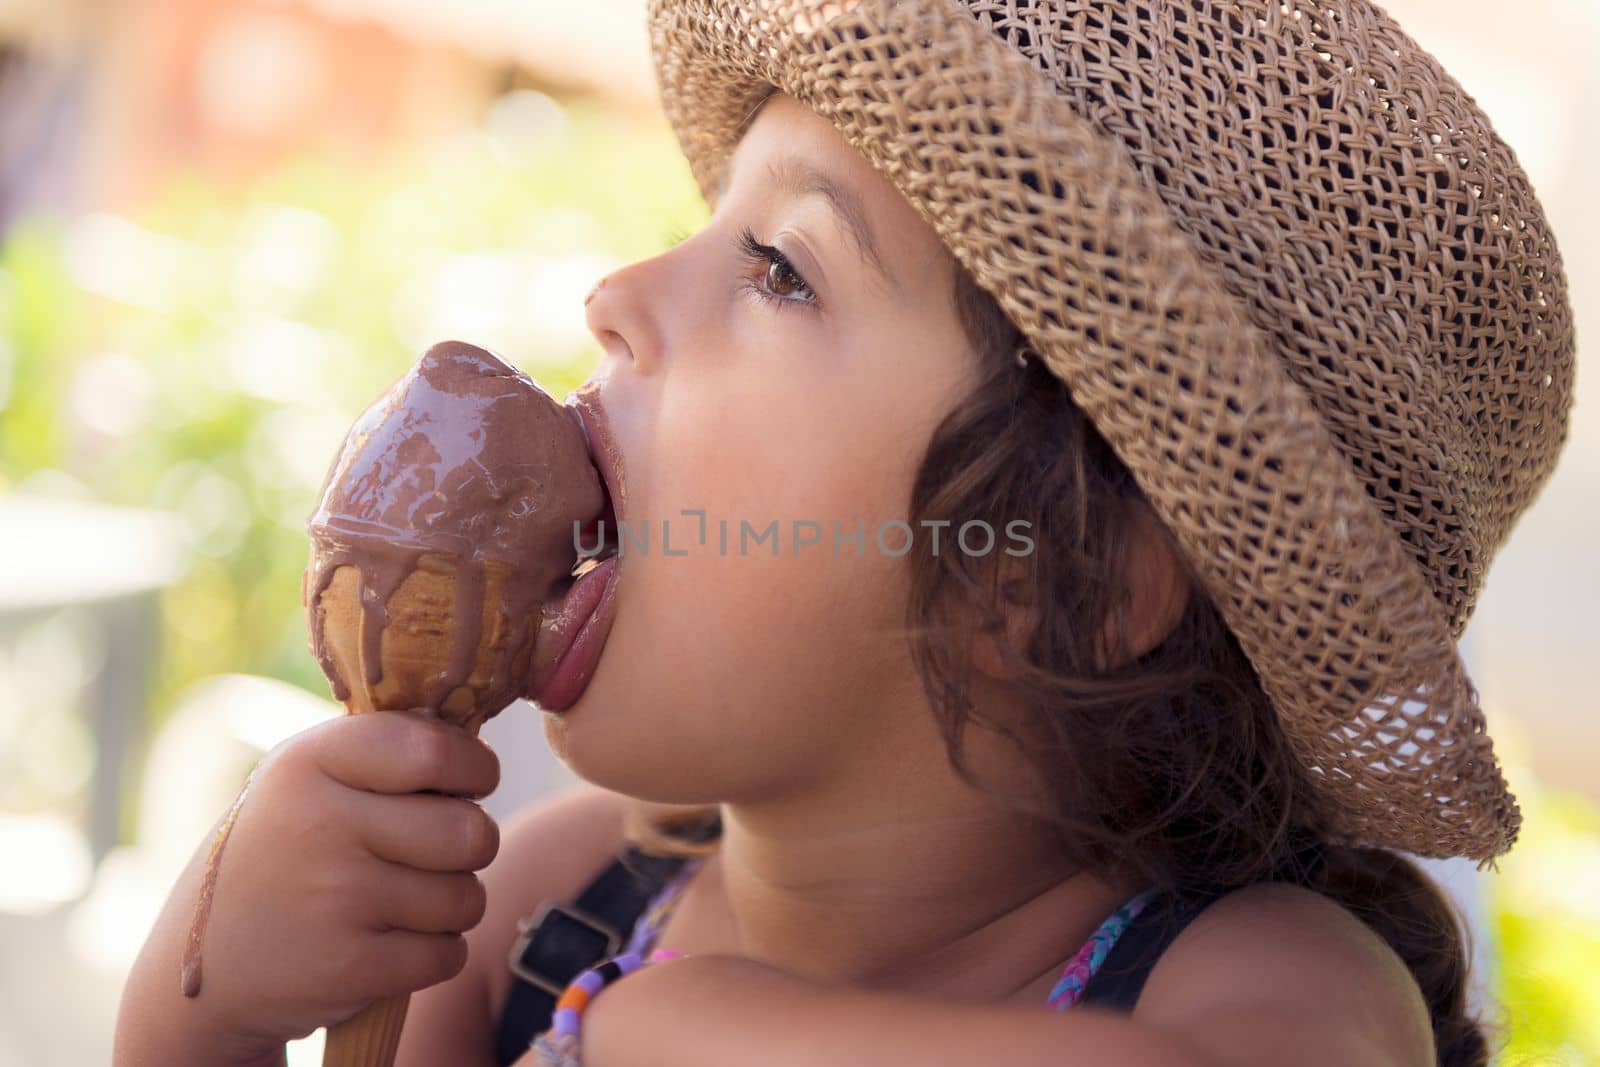 Girl licking an ice cream that melts in her hand by raulmelldo